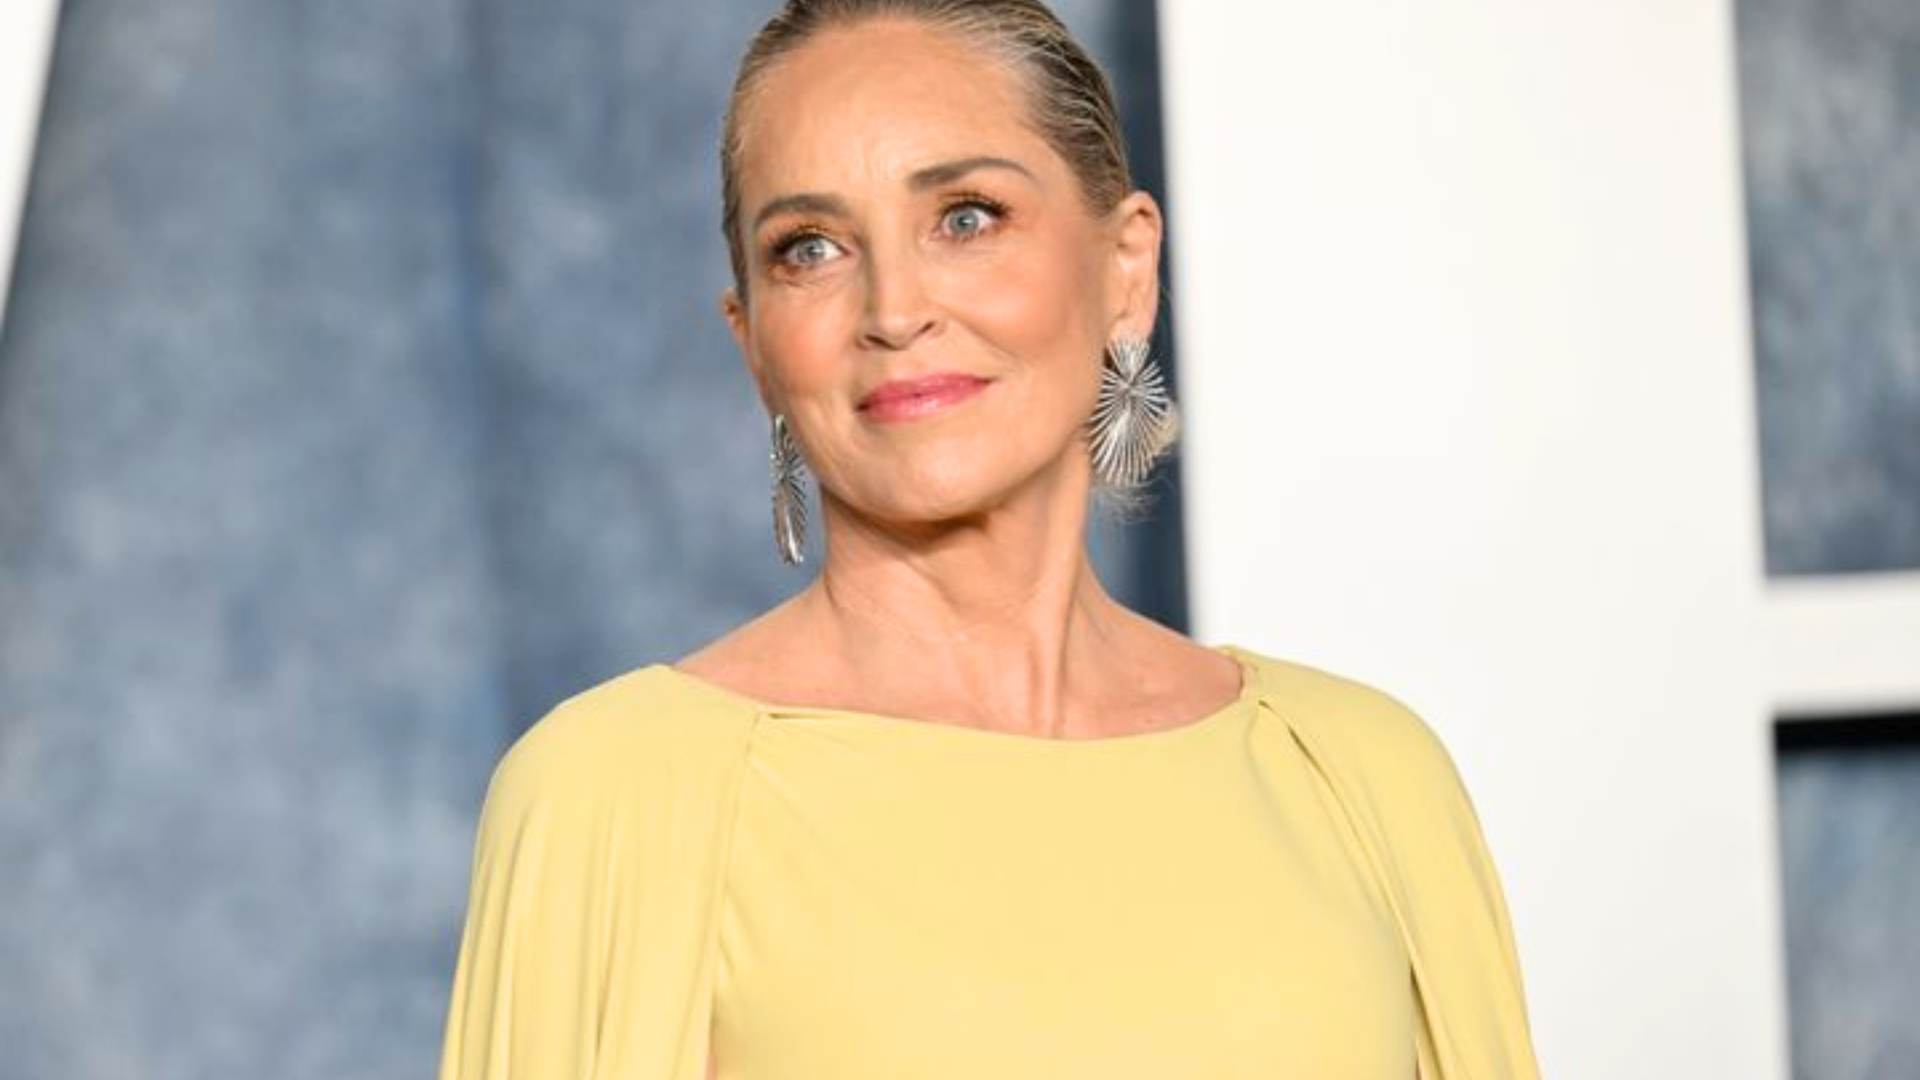 Sharon Stone Name Drops The Producer Who Pressured Her To Sleep With ‘Sliver’ Co-Star Billy Baldwin